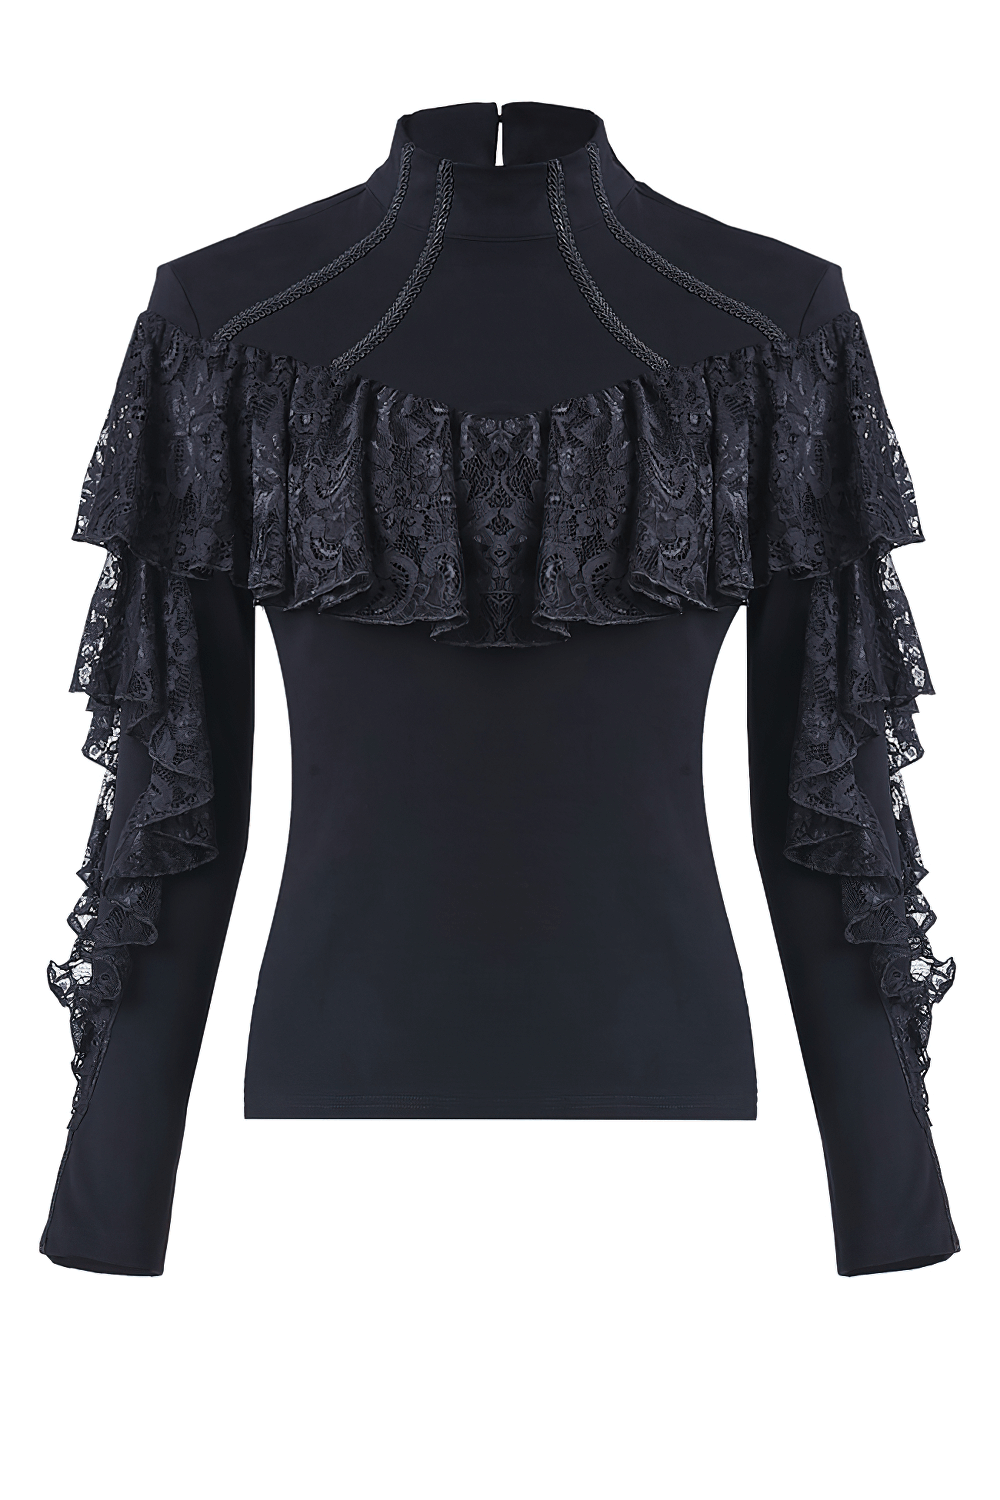 Goth Fashion Knit Top with Lace Long Sleeves for Women